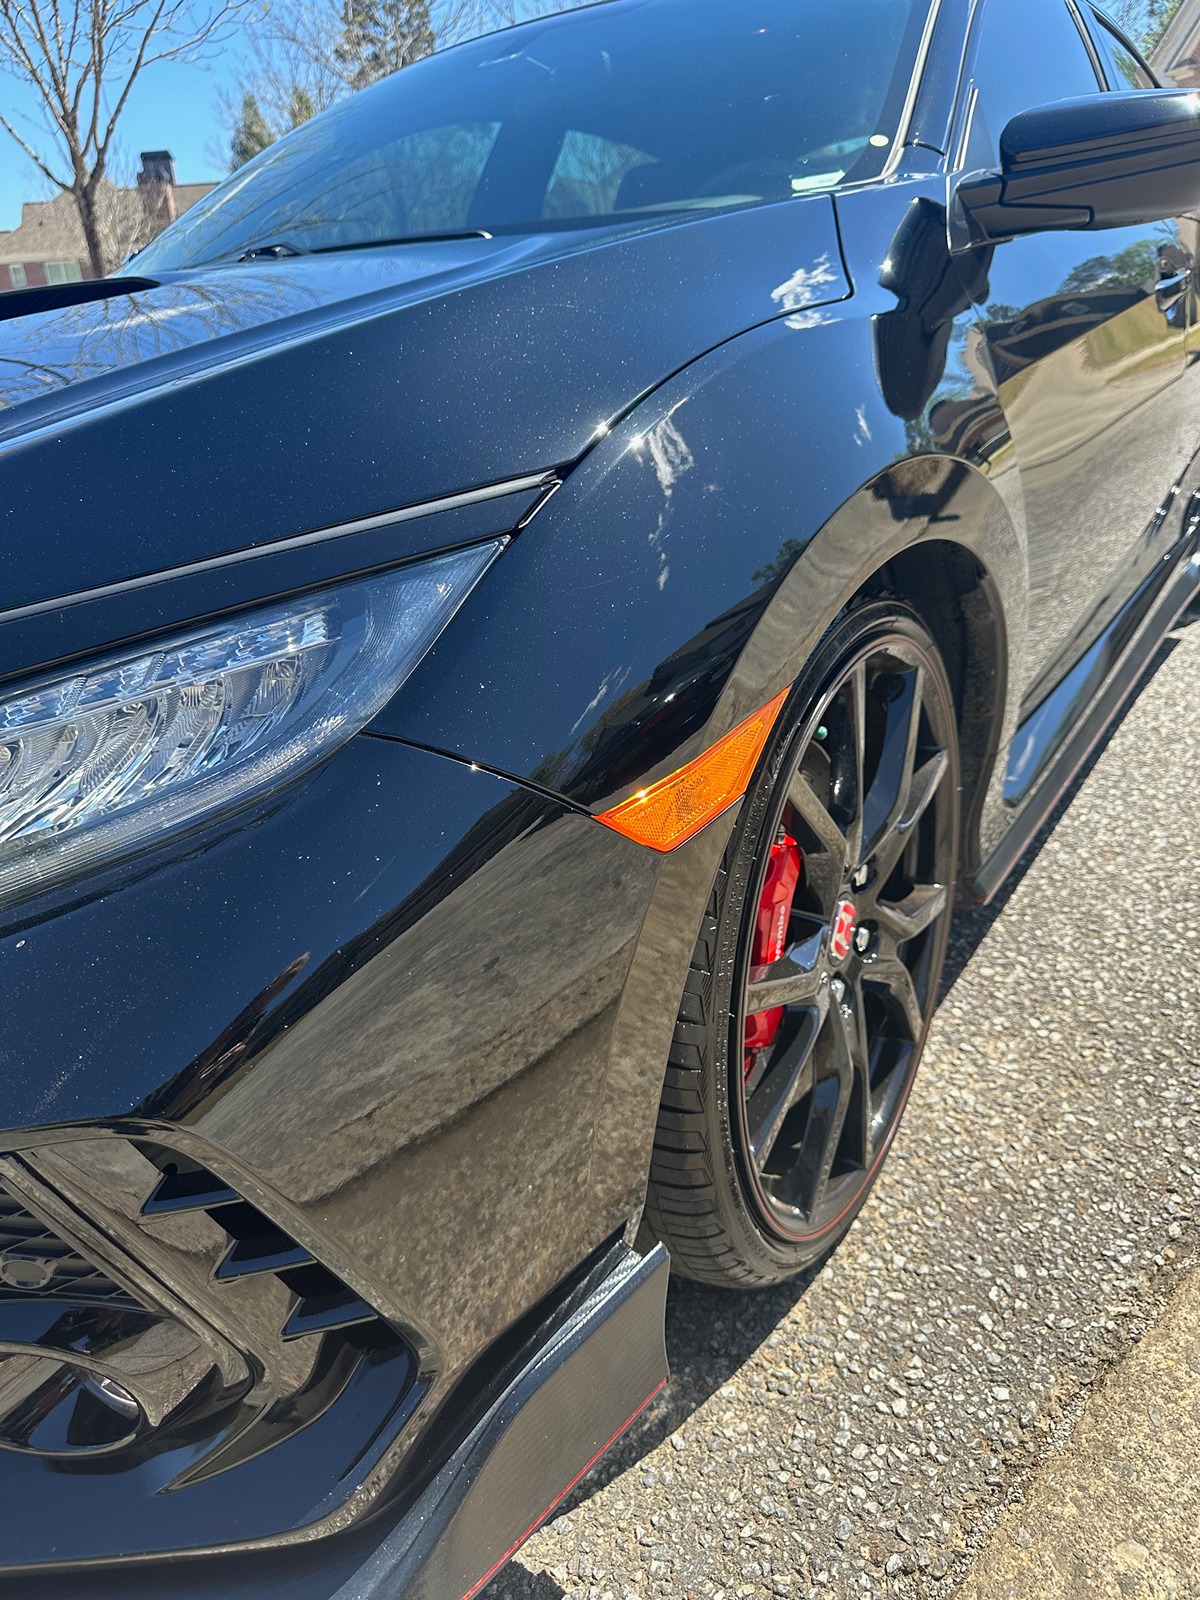 Honda Civic 10th gen Sold. 2019 Civic Type R for sale IMG_8120